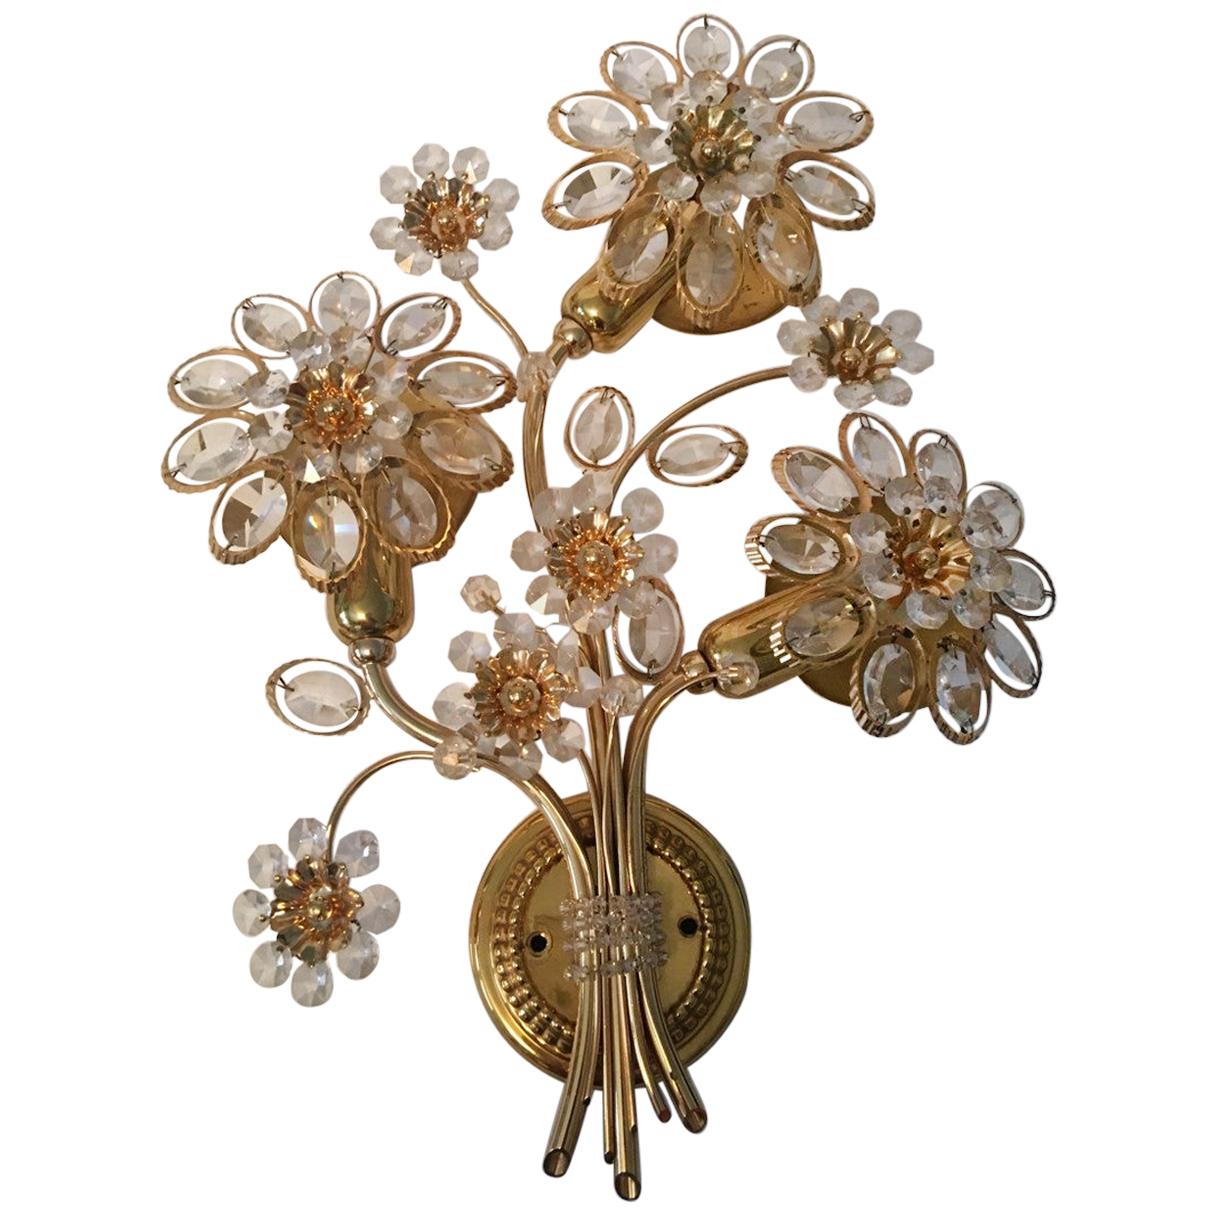 Single Bunch of Flowers Shaped Sconce by Palwa, German, 1970s